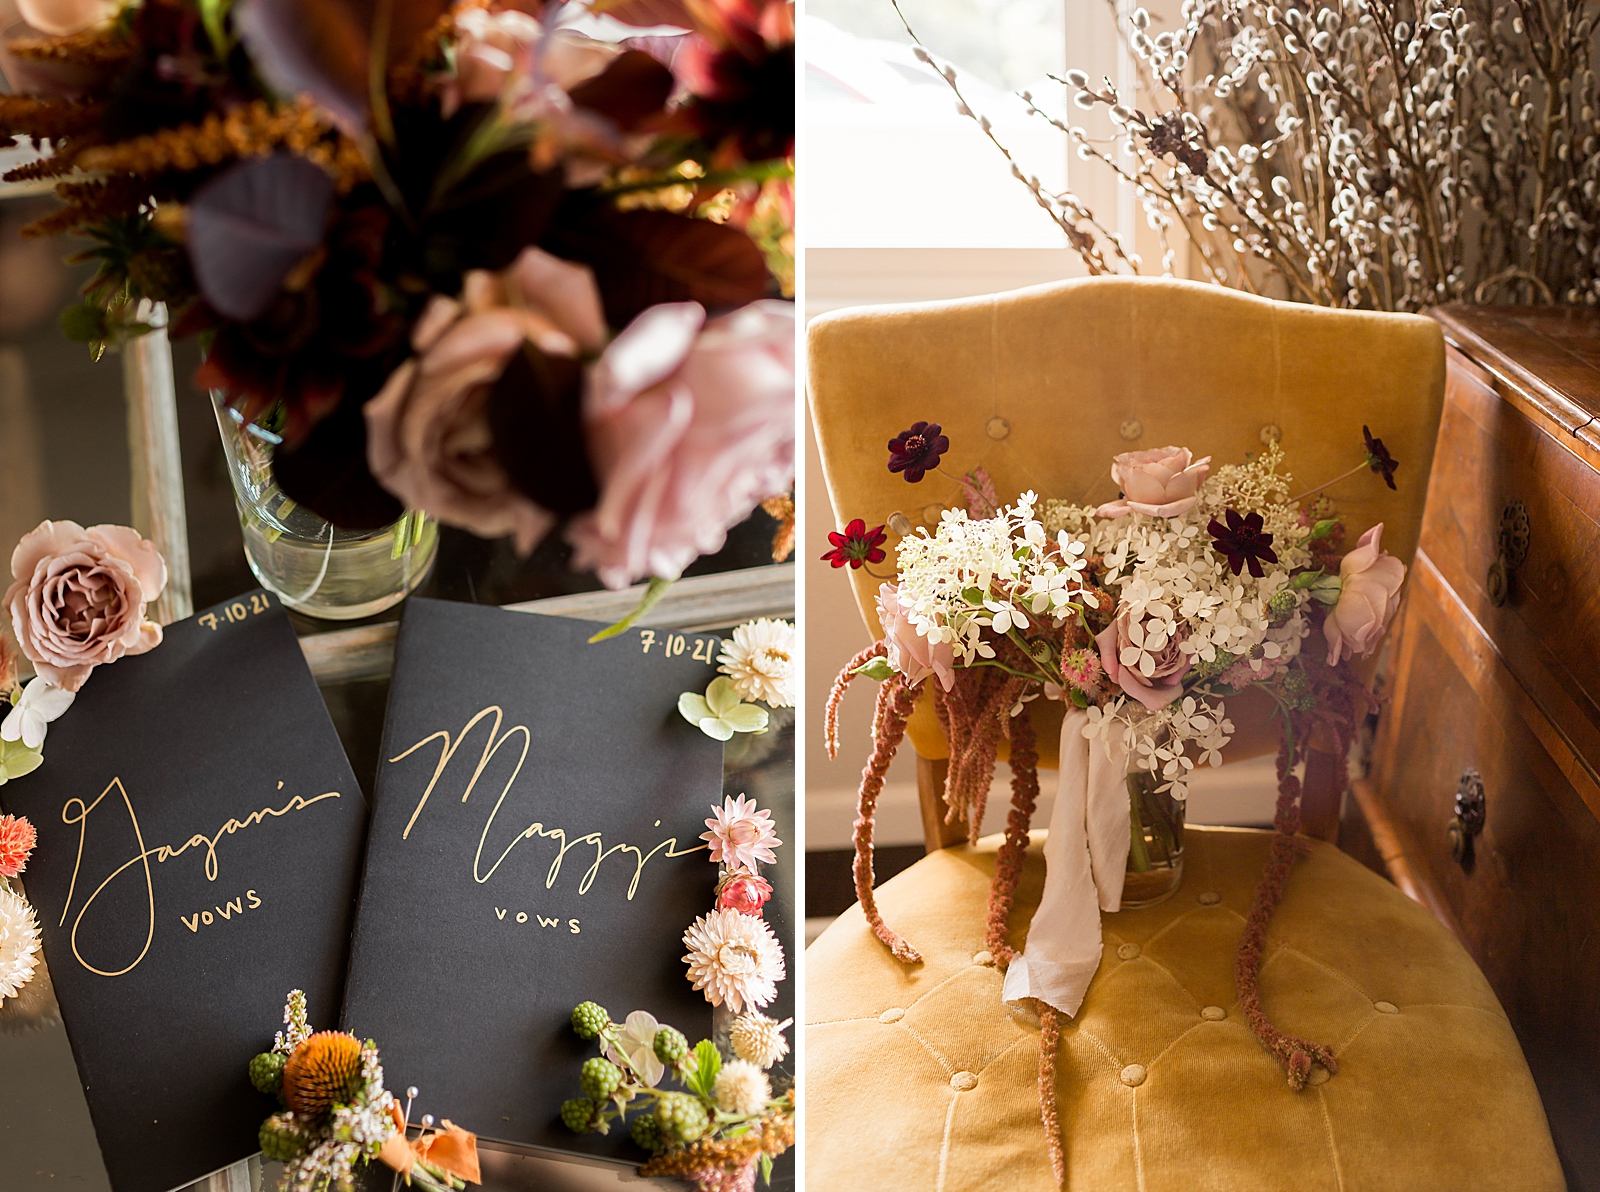 Detail shot of wedding invitations and floral bouquet on chair